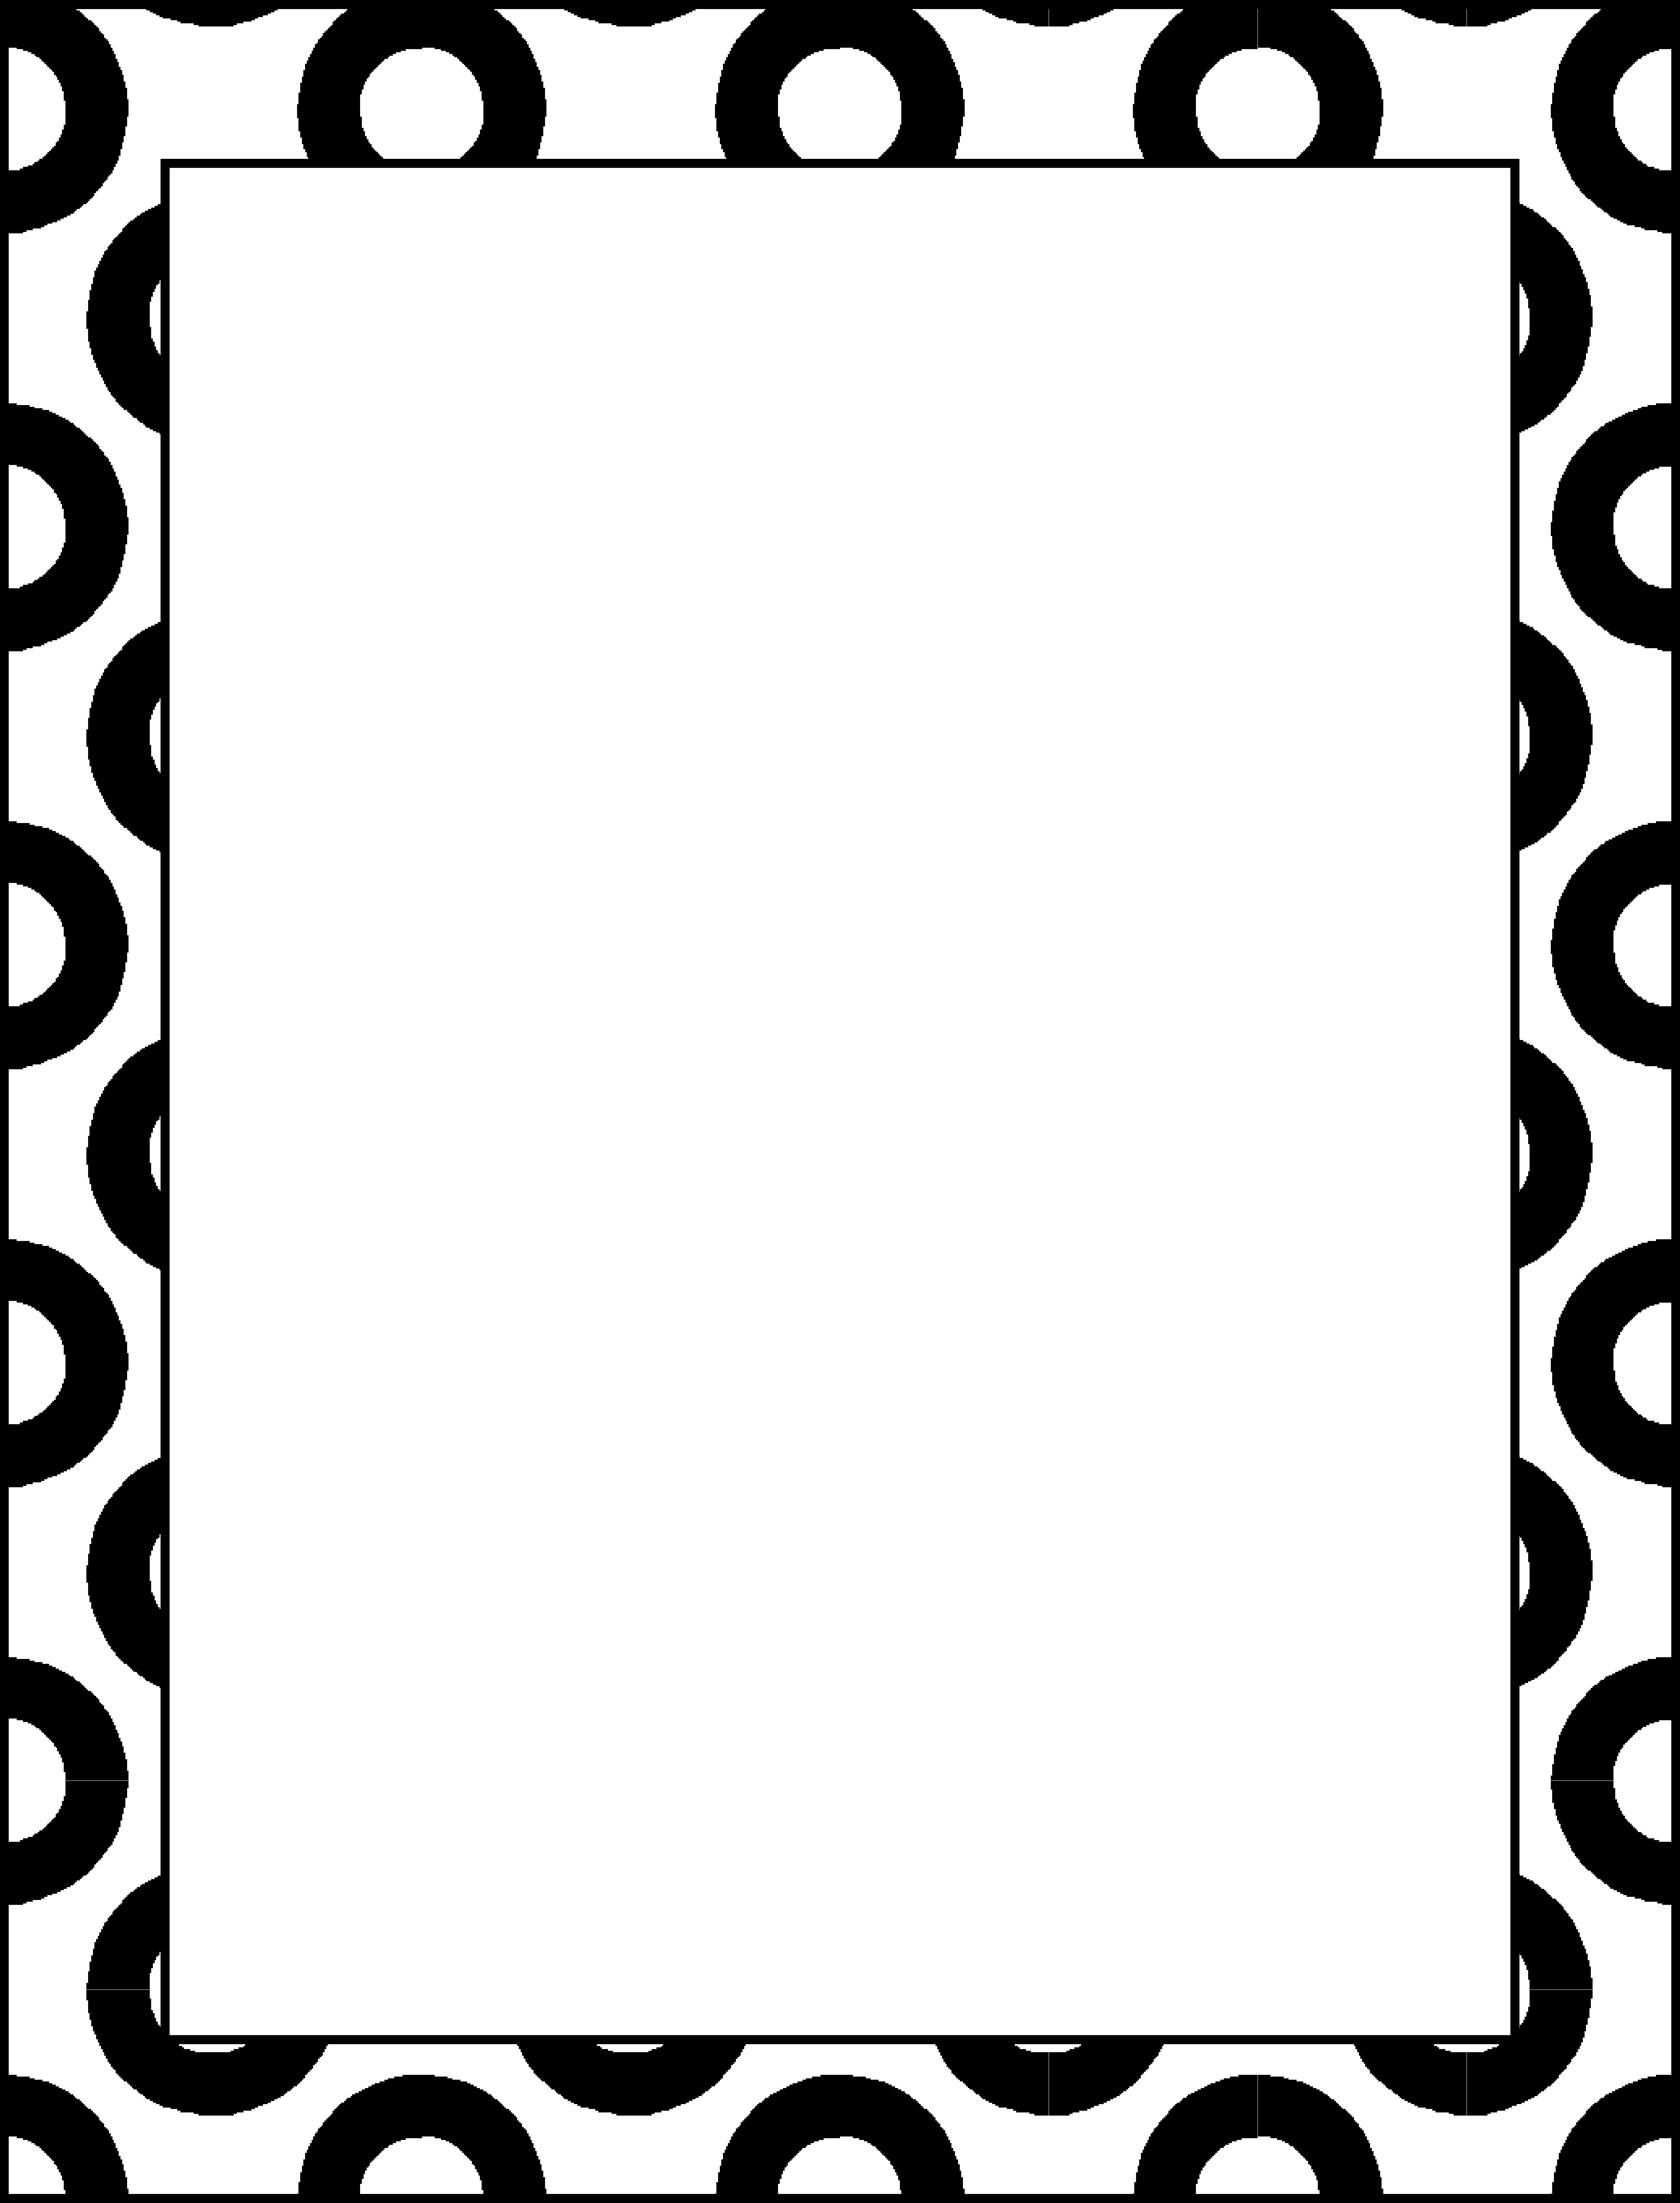 Border Designs for Project/Project File Decoration/simple border designs to  draw on paper /Design | Border Designs for Project/Project File  Decoration/simple border designs to draw on paper /Design border design how  to decorate